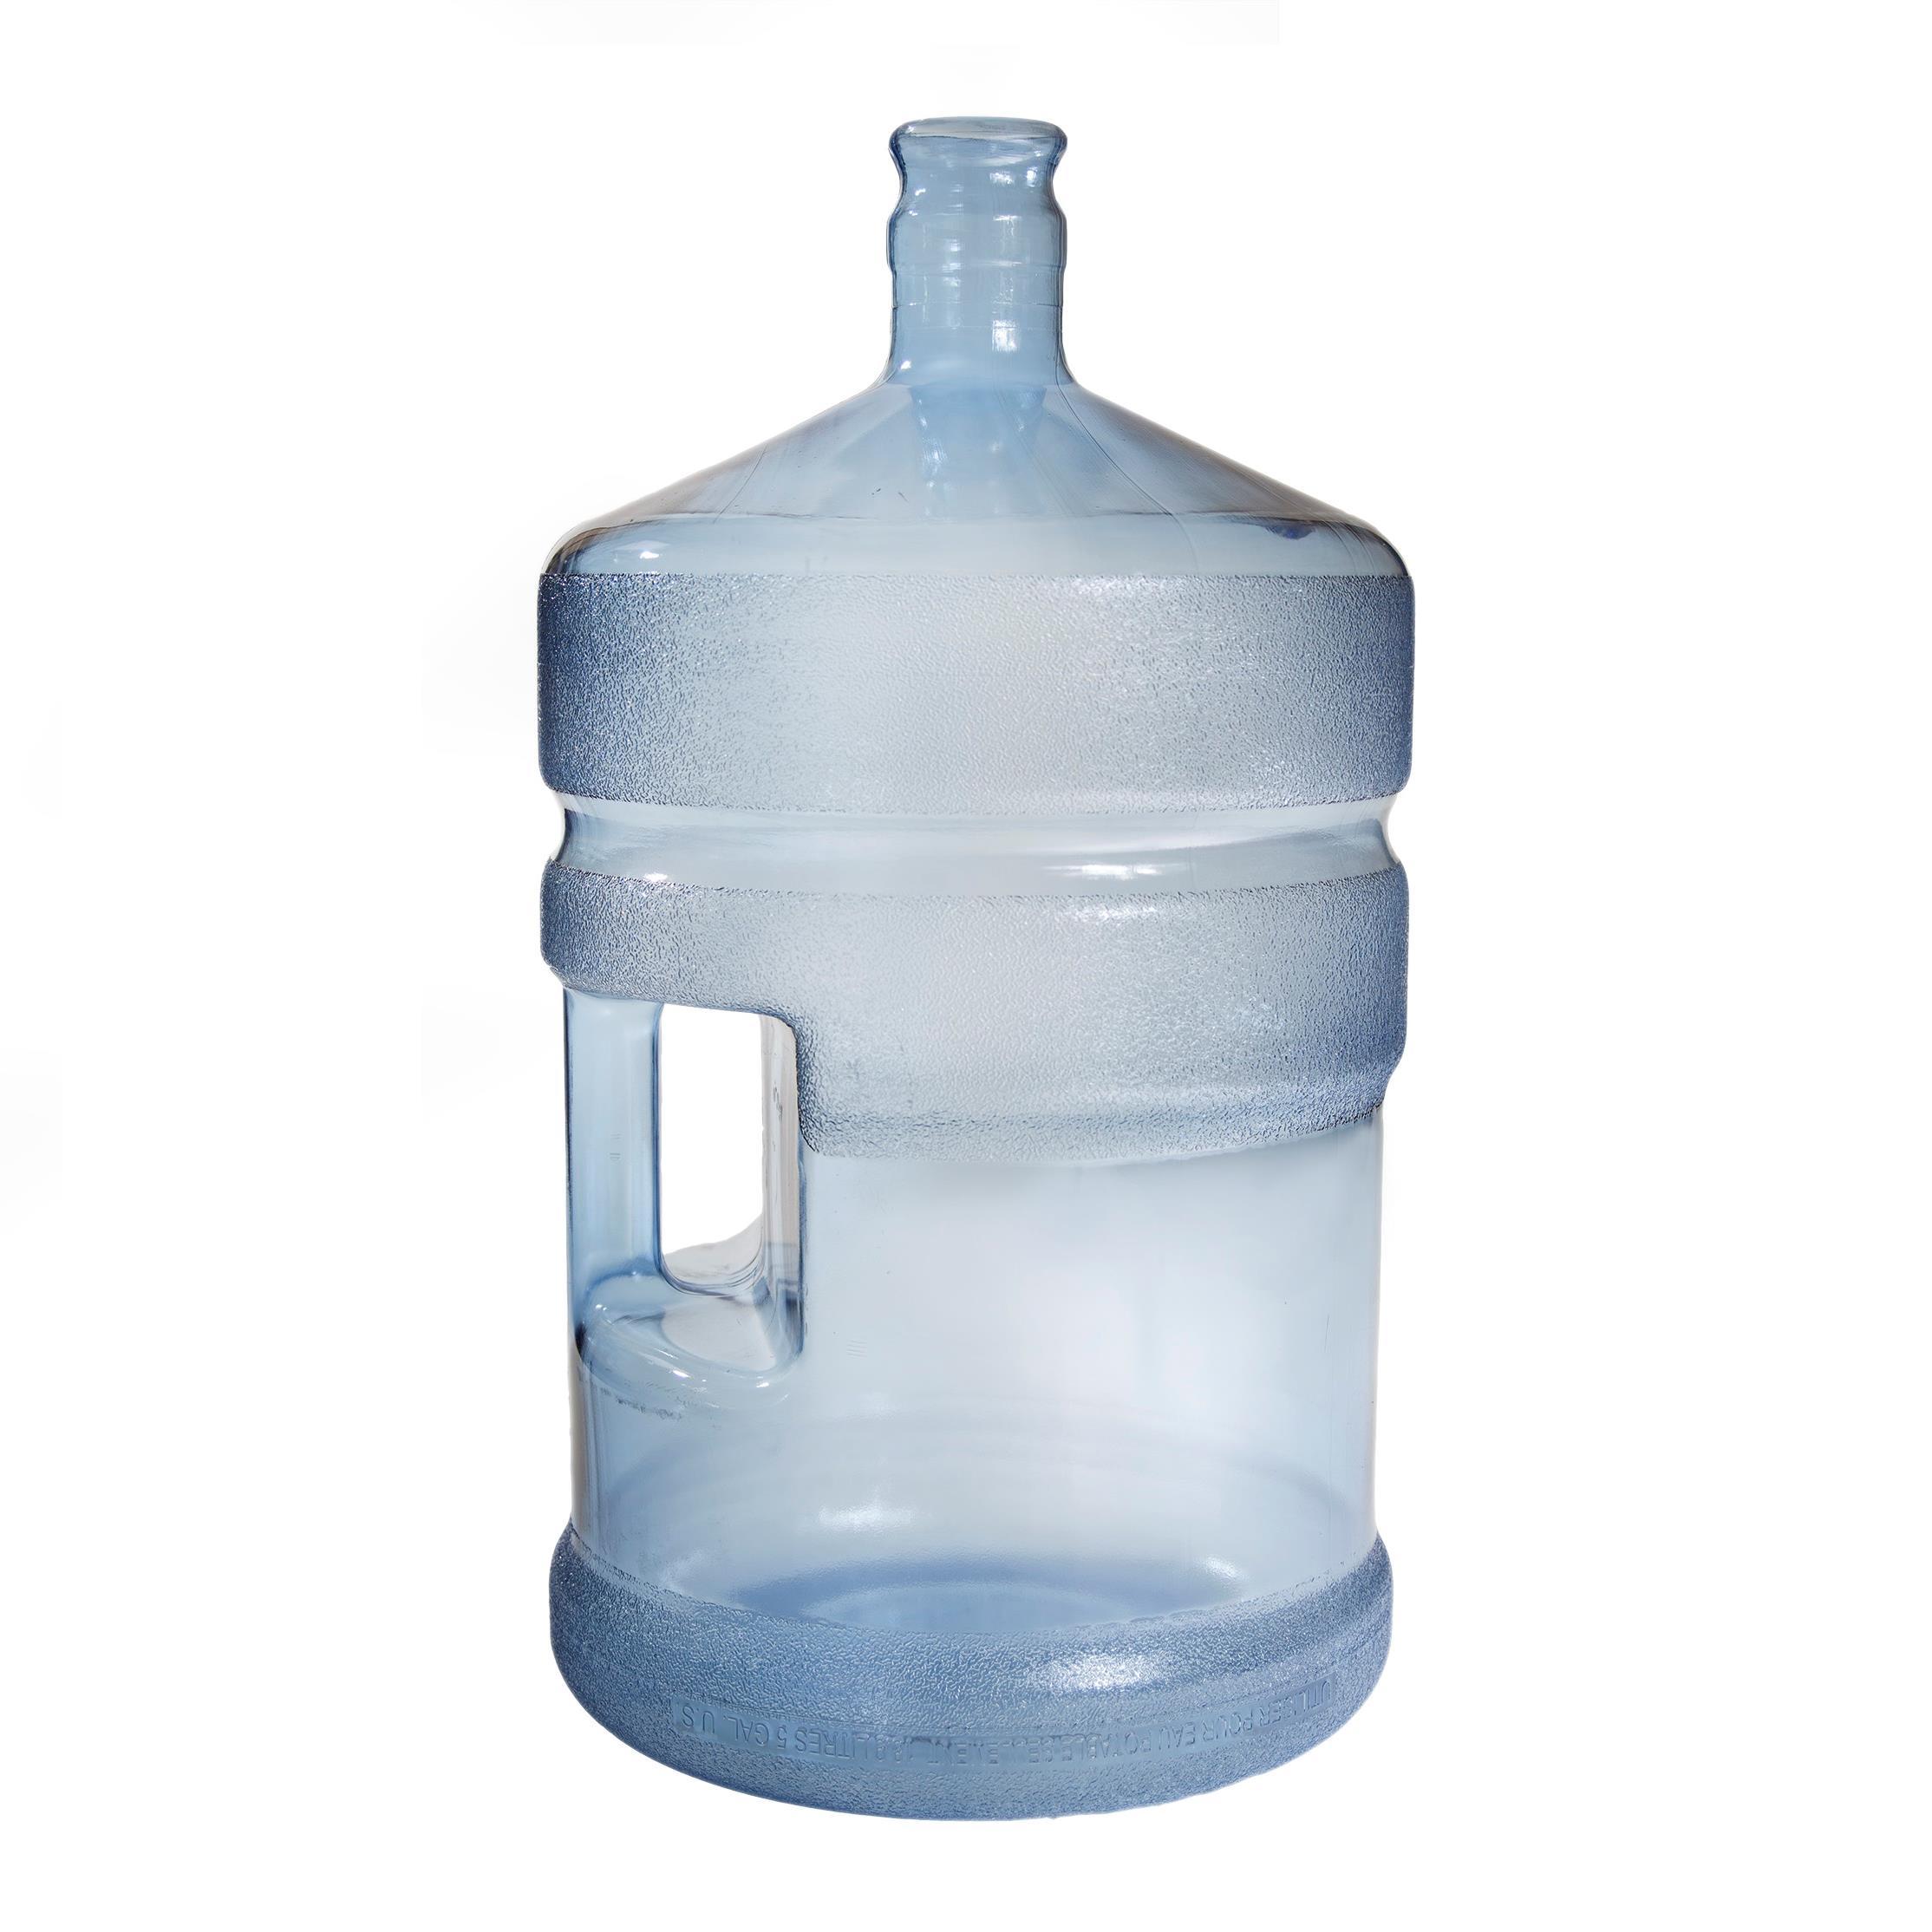 Canadian owned 5 & 3 gallon bottle supplier & custom molder. We thrive to deliver quality products in N.A, Africa & Caribbean. Contact us for more information.